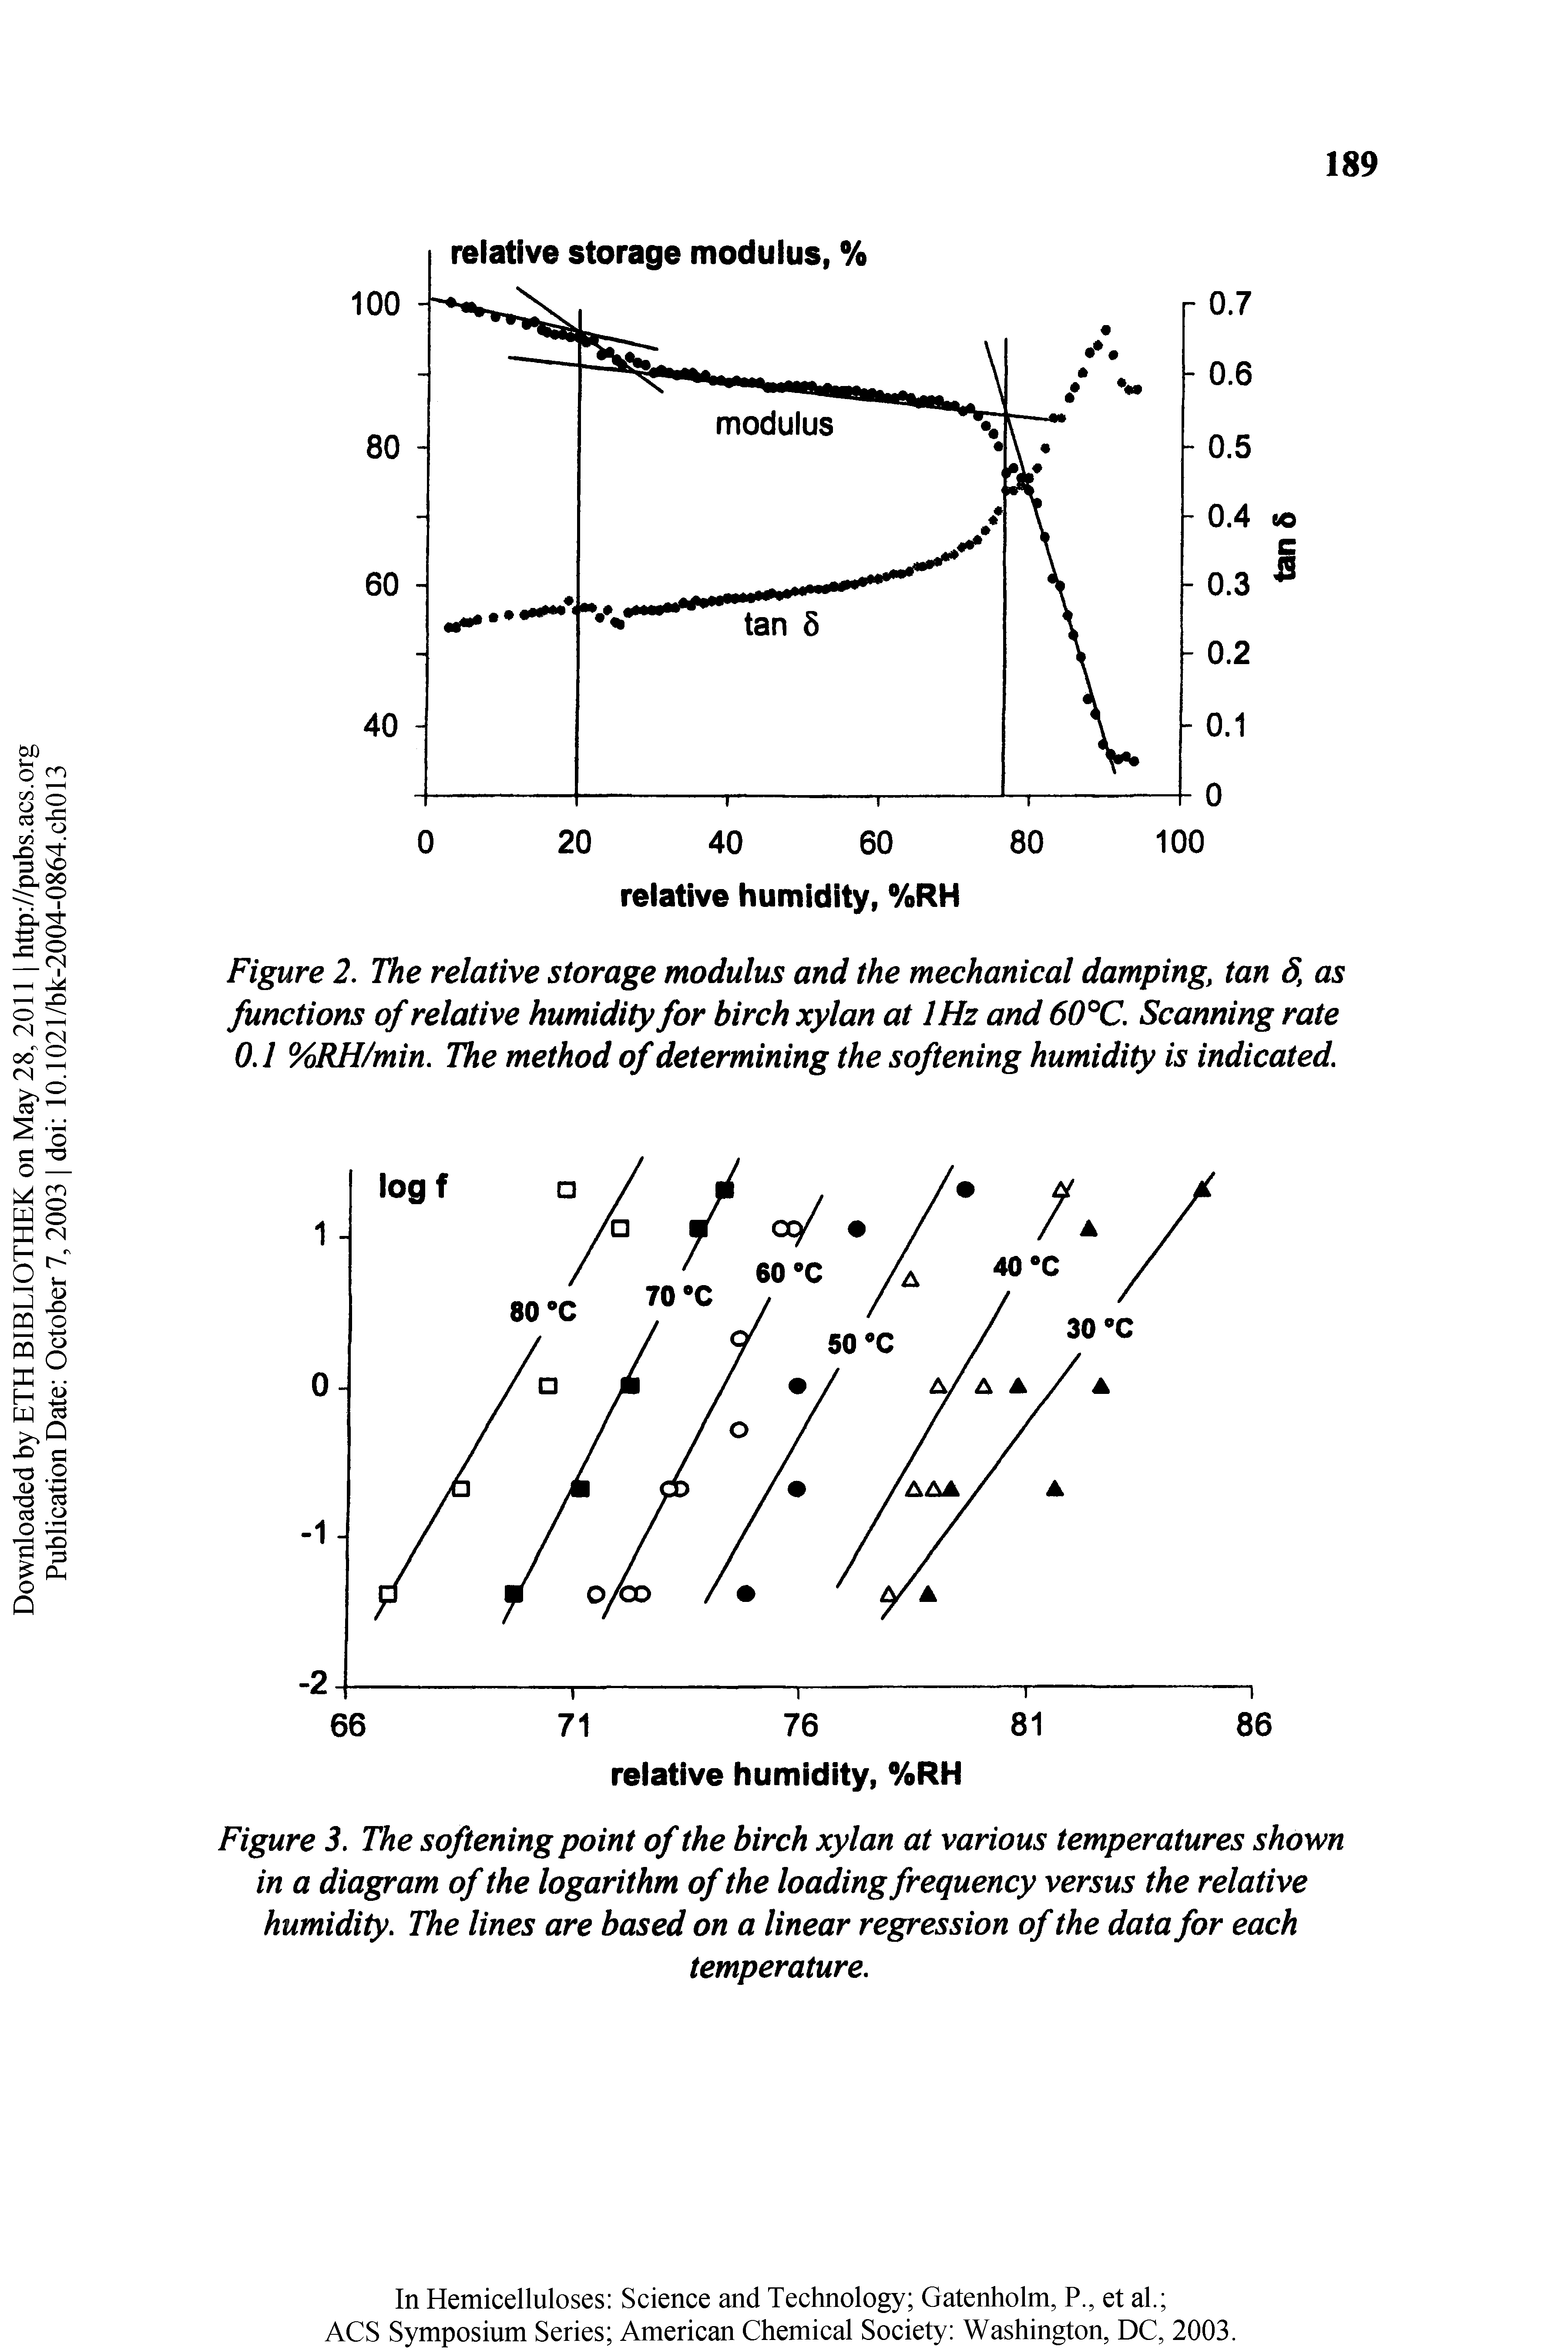 Figure 3. The softening point of the birch xylan at various temperatures shown in a diagram of the logarithm of the loading frequency versus the relative humidity. The lines are based on a linear regression of the data for each...